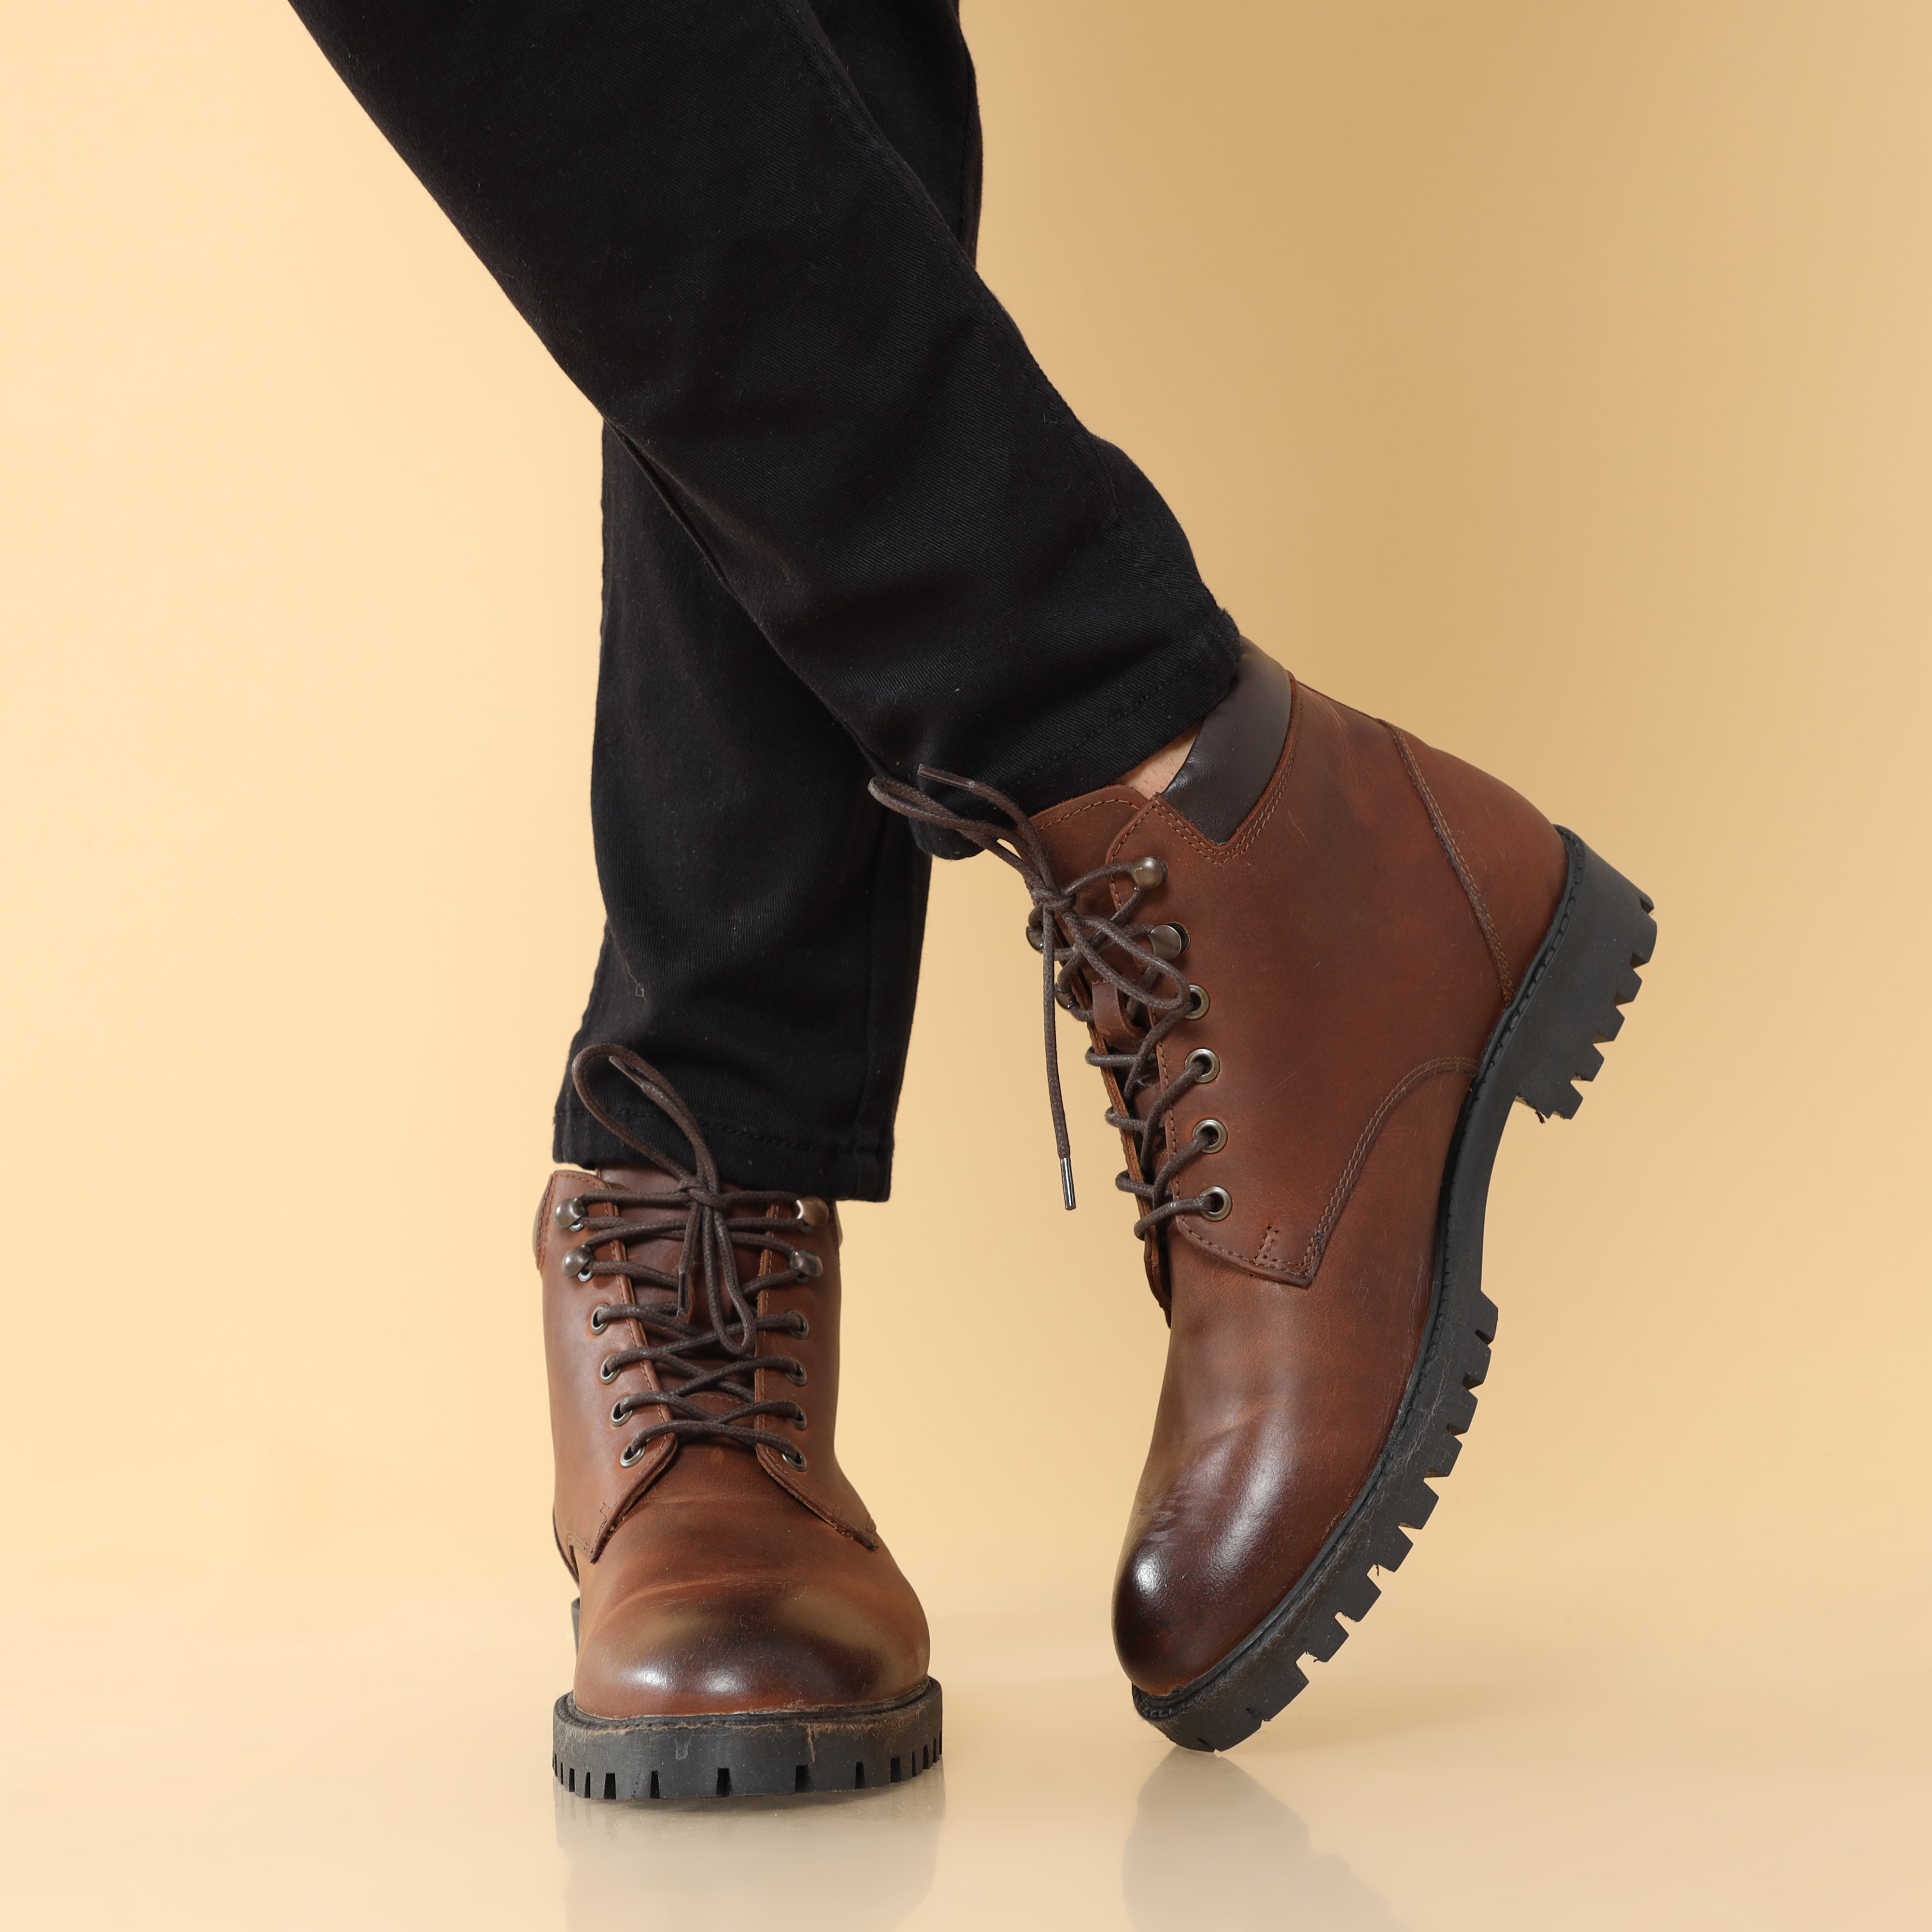 "Durable black leather boot accented with a smooth-operating zipper, ideal for everyday wear and versatility.